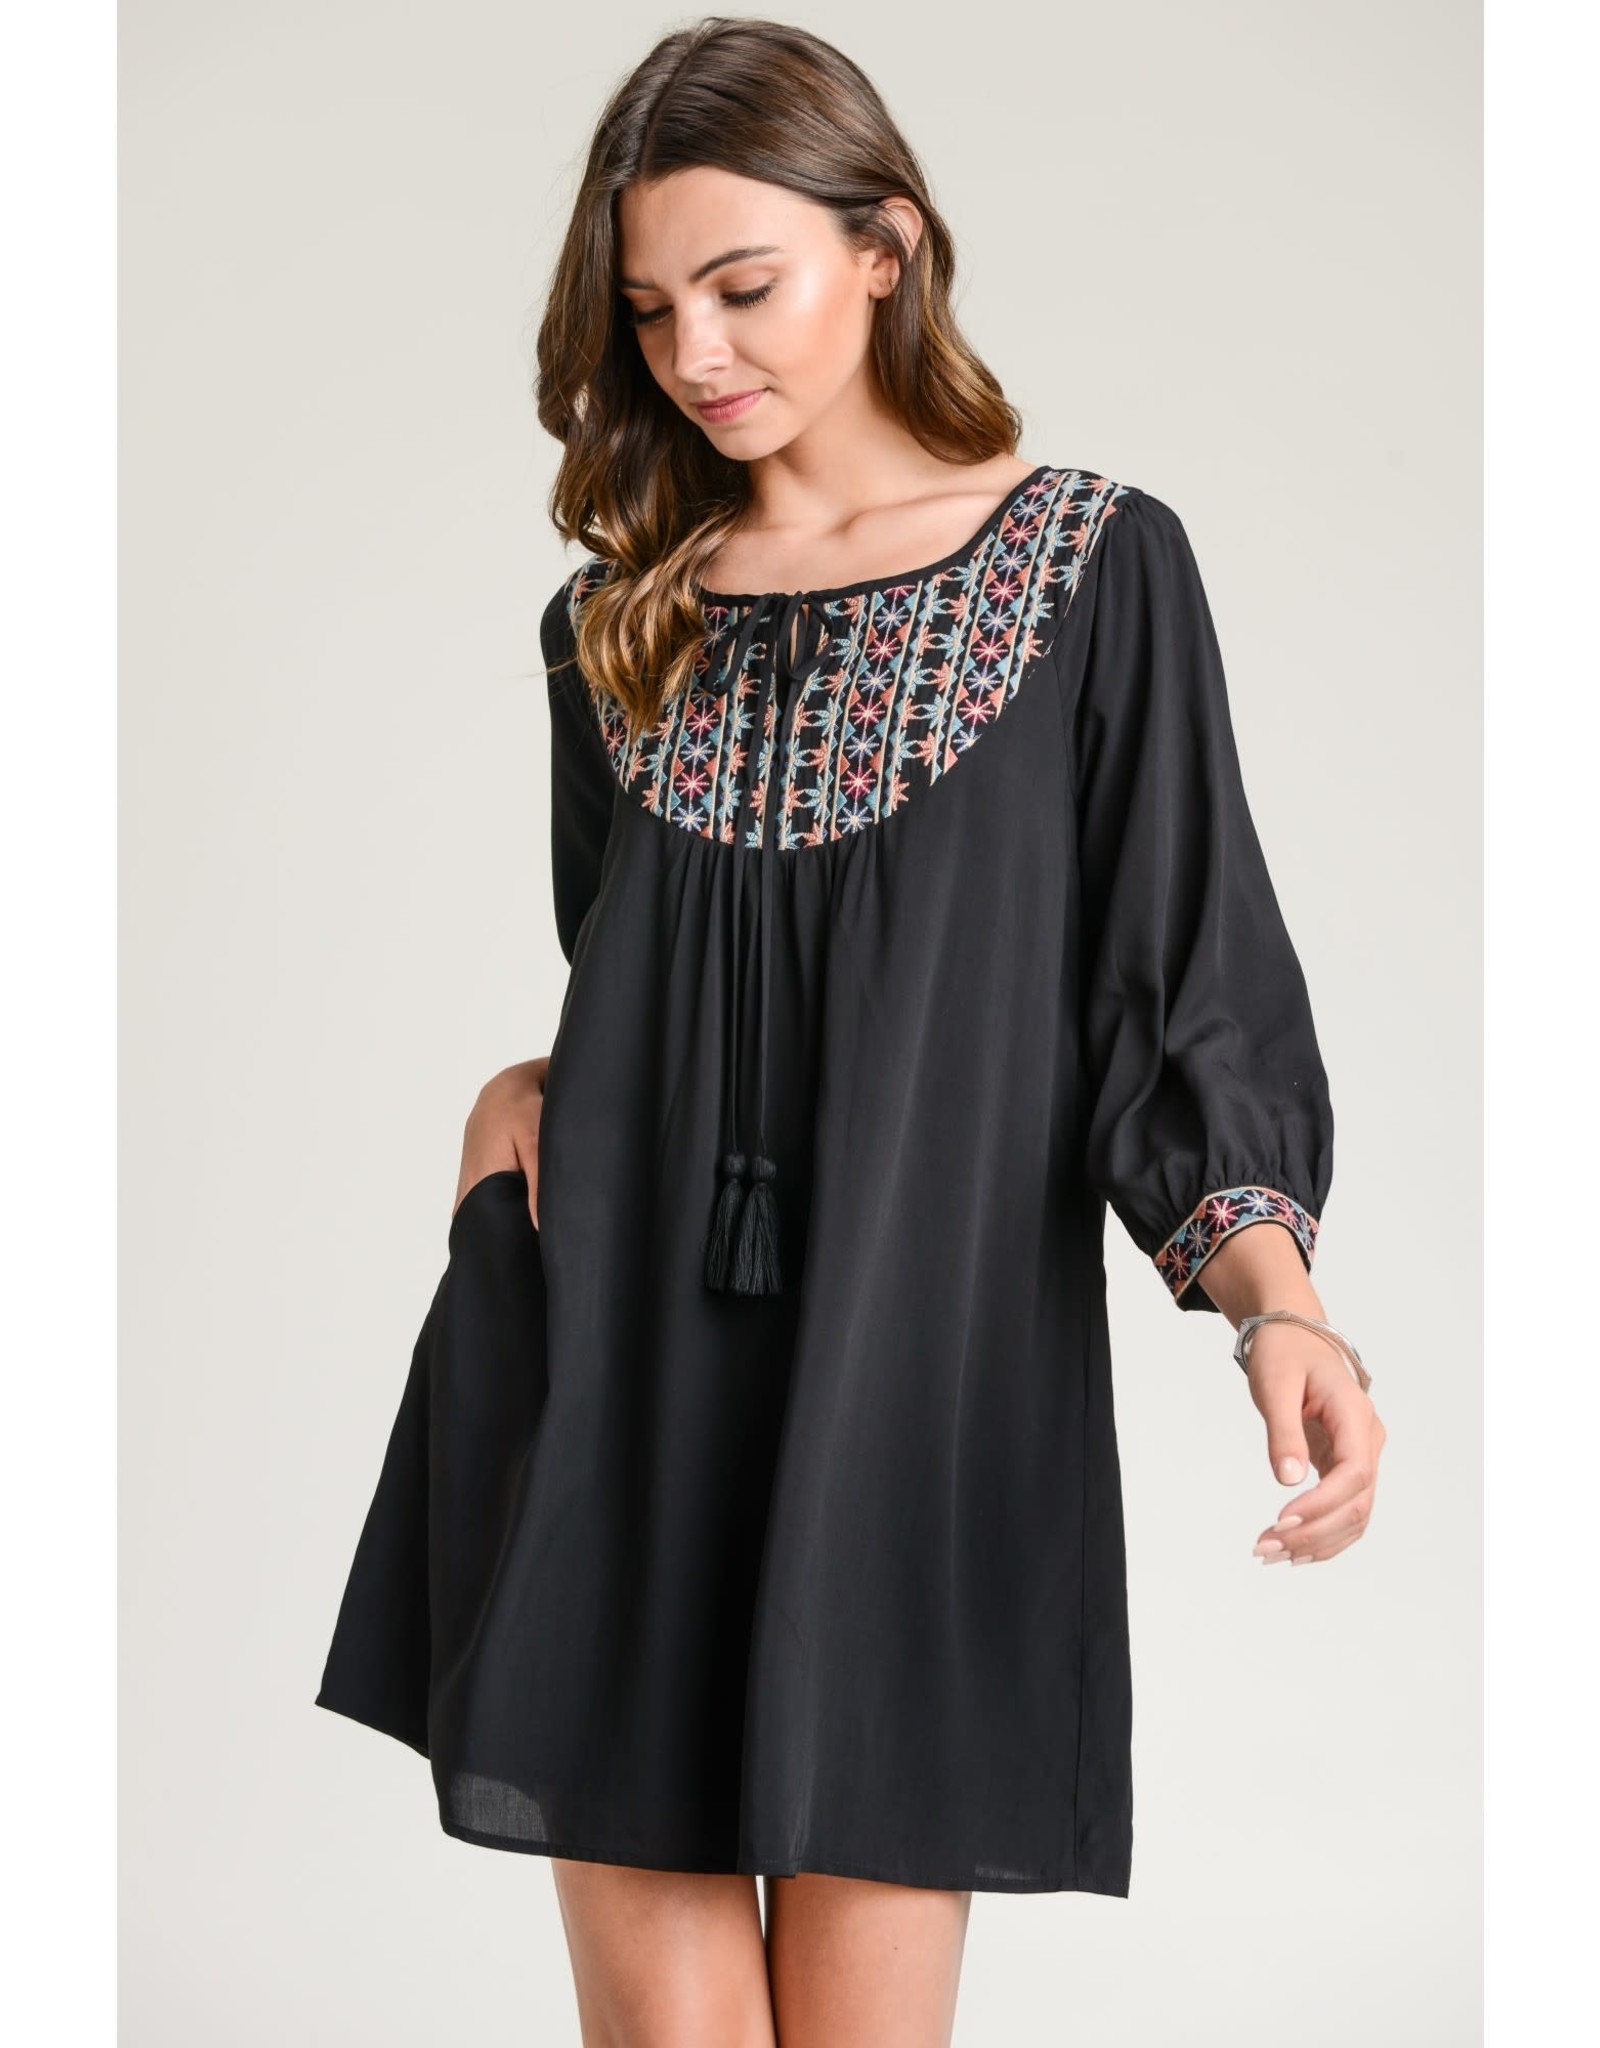 The Ritzy Gypsy JOLENE Embroidered Dress